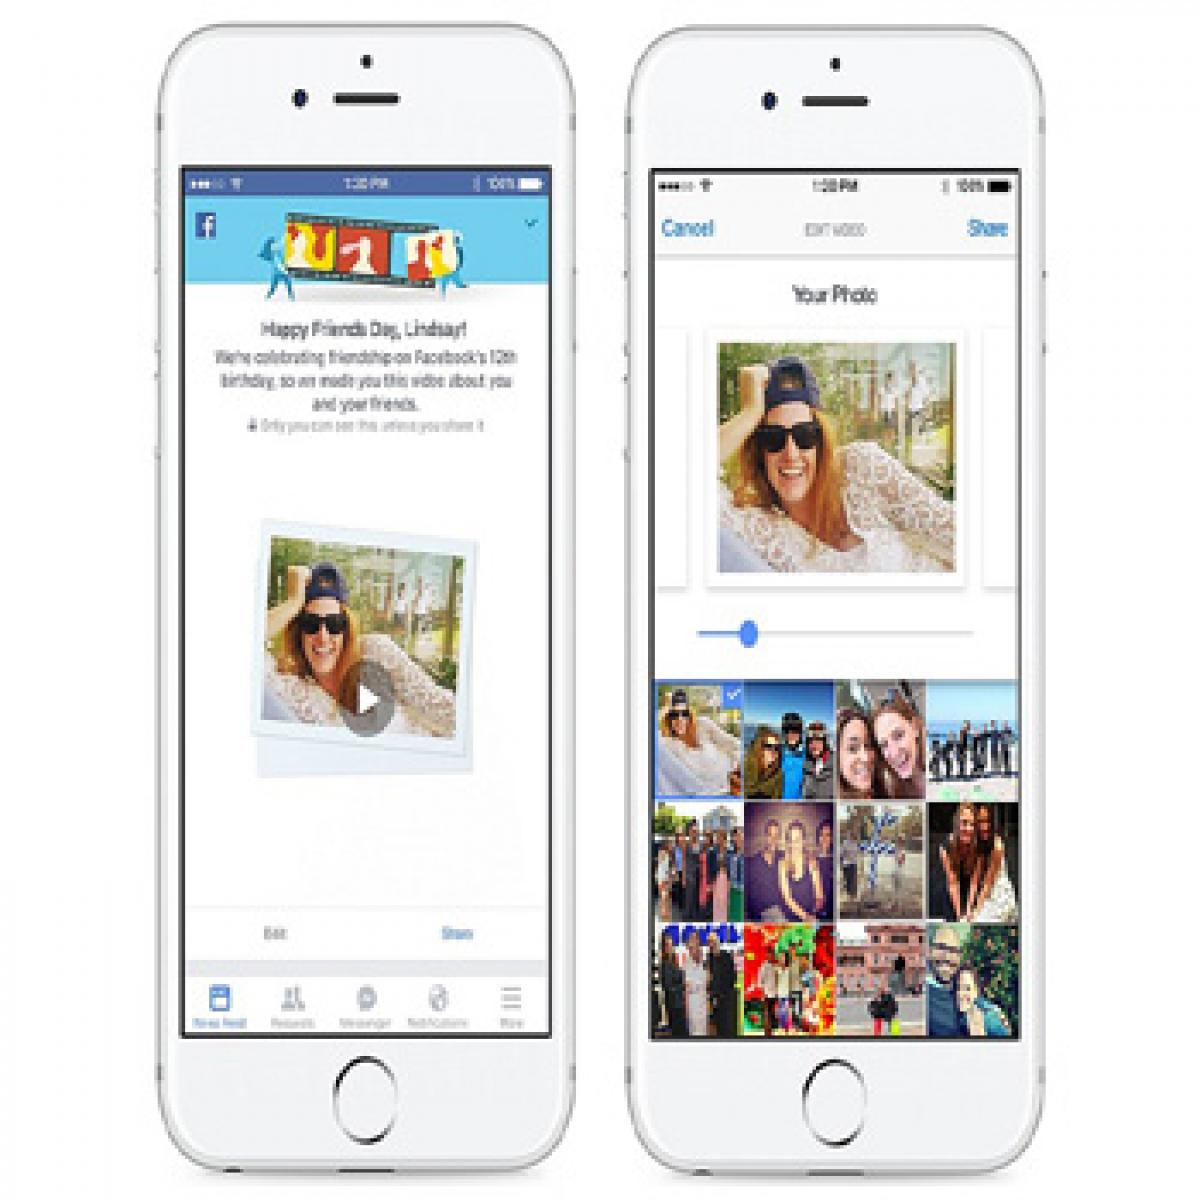 On Friends Day, Fb creates personalised videos that celebrate your friends